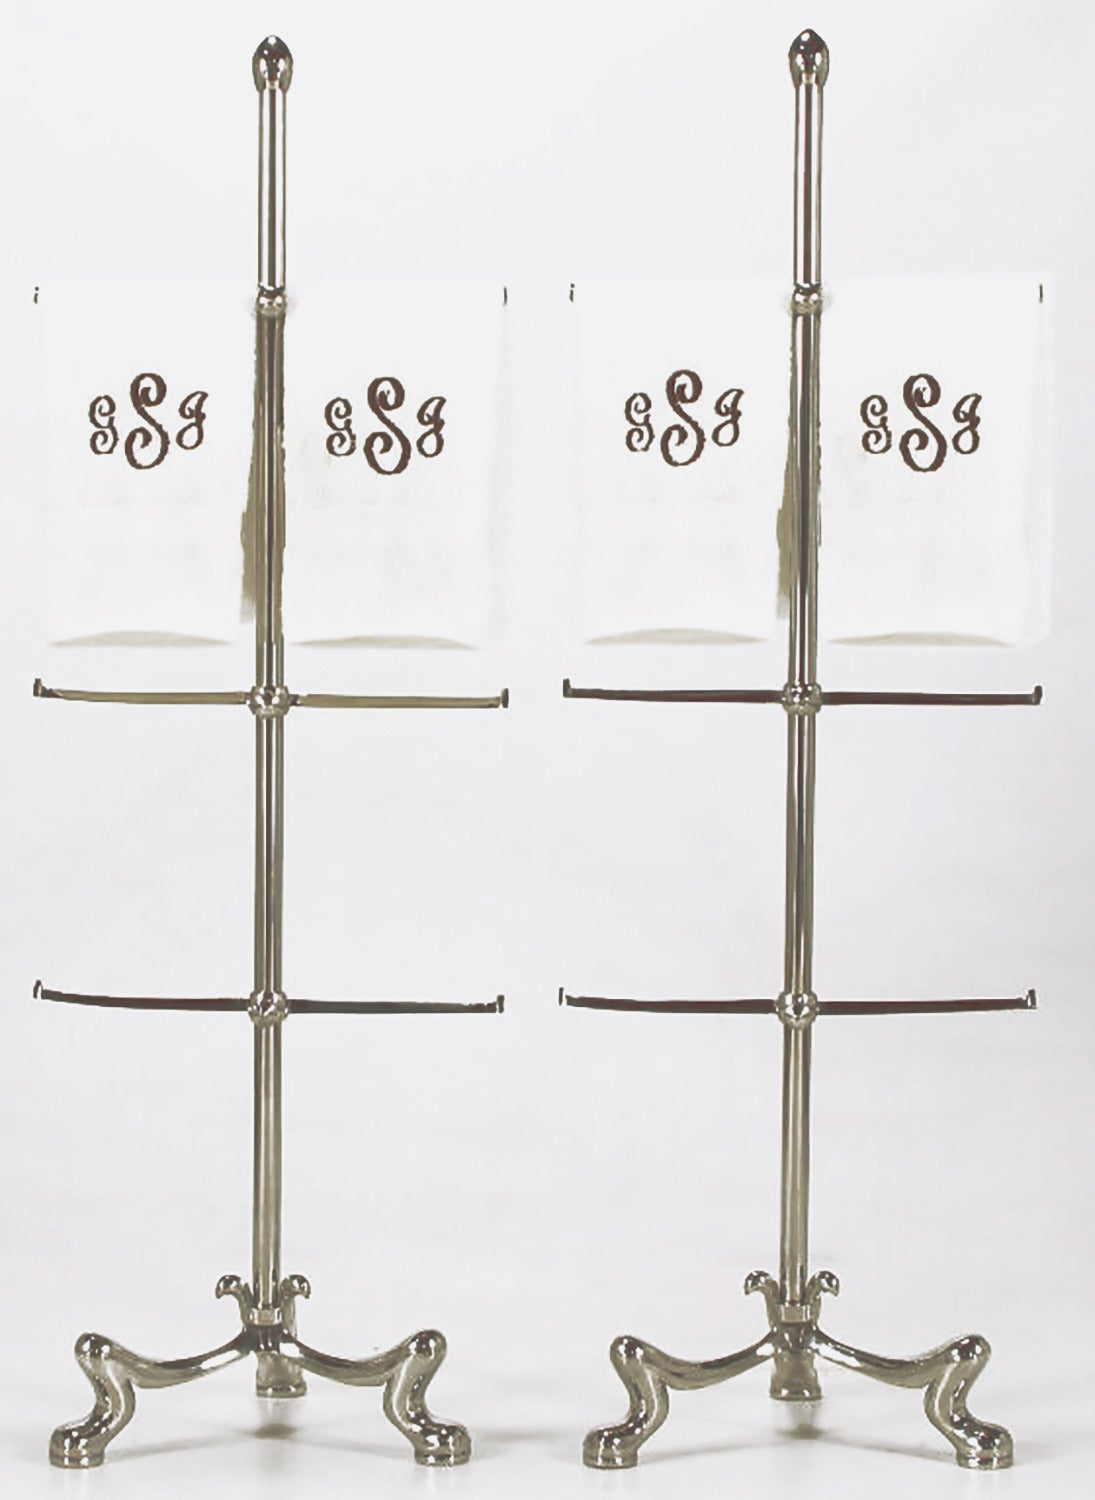 Pair of chrome-plated French Regency styles six bar towel holders. Paw feet tripod bases, with adjustable height bars on chrome-plated dowel with top finial. May also be used for visual storage of jewelry, or combined together with glass shelves for